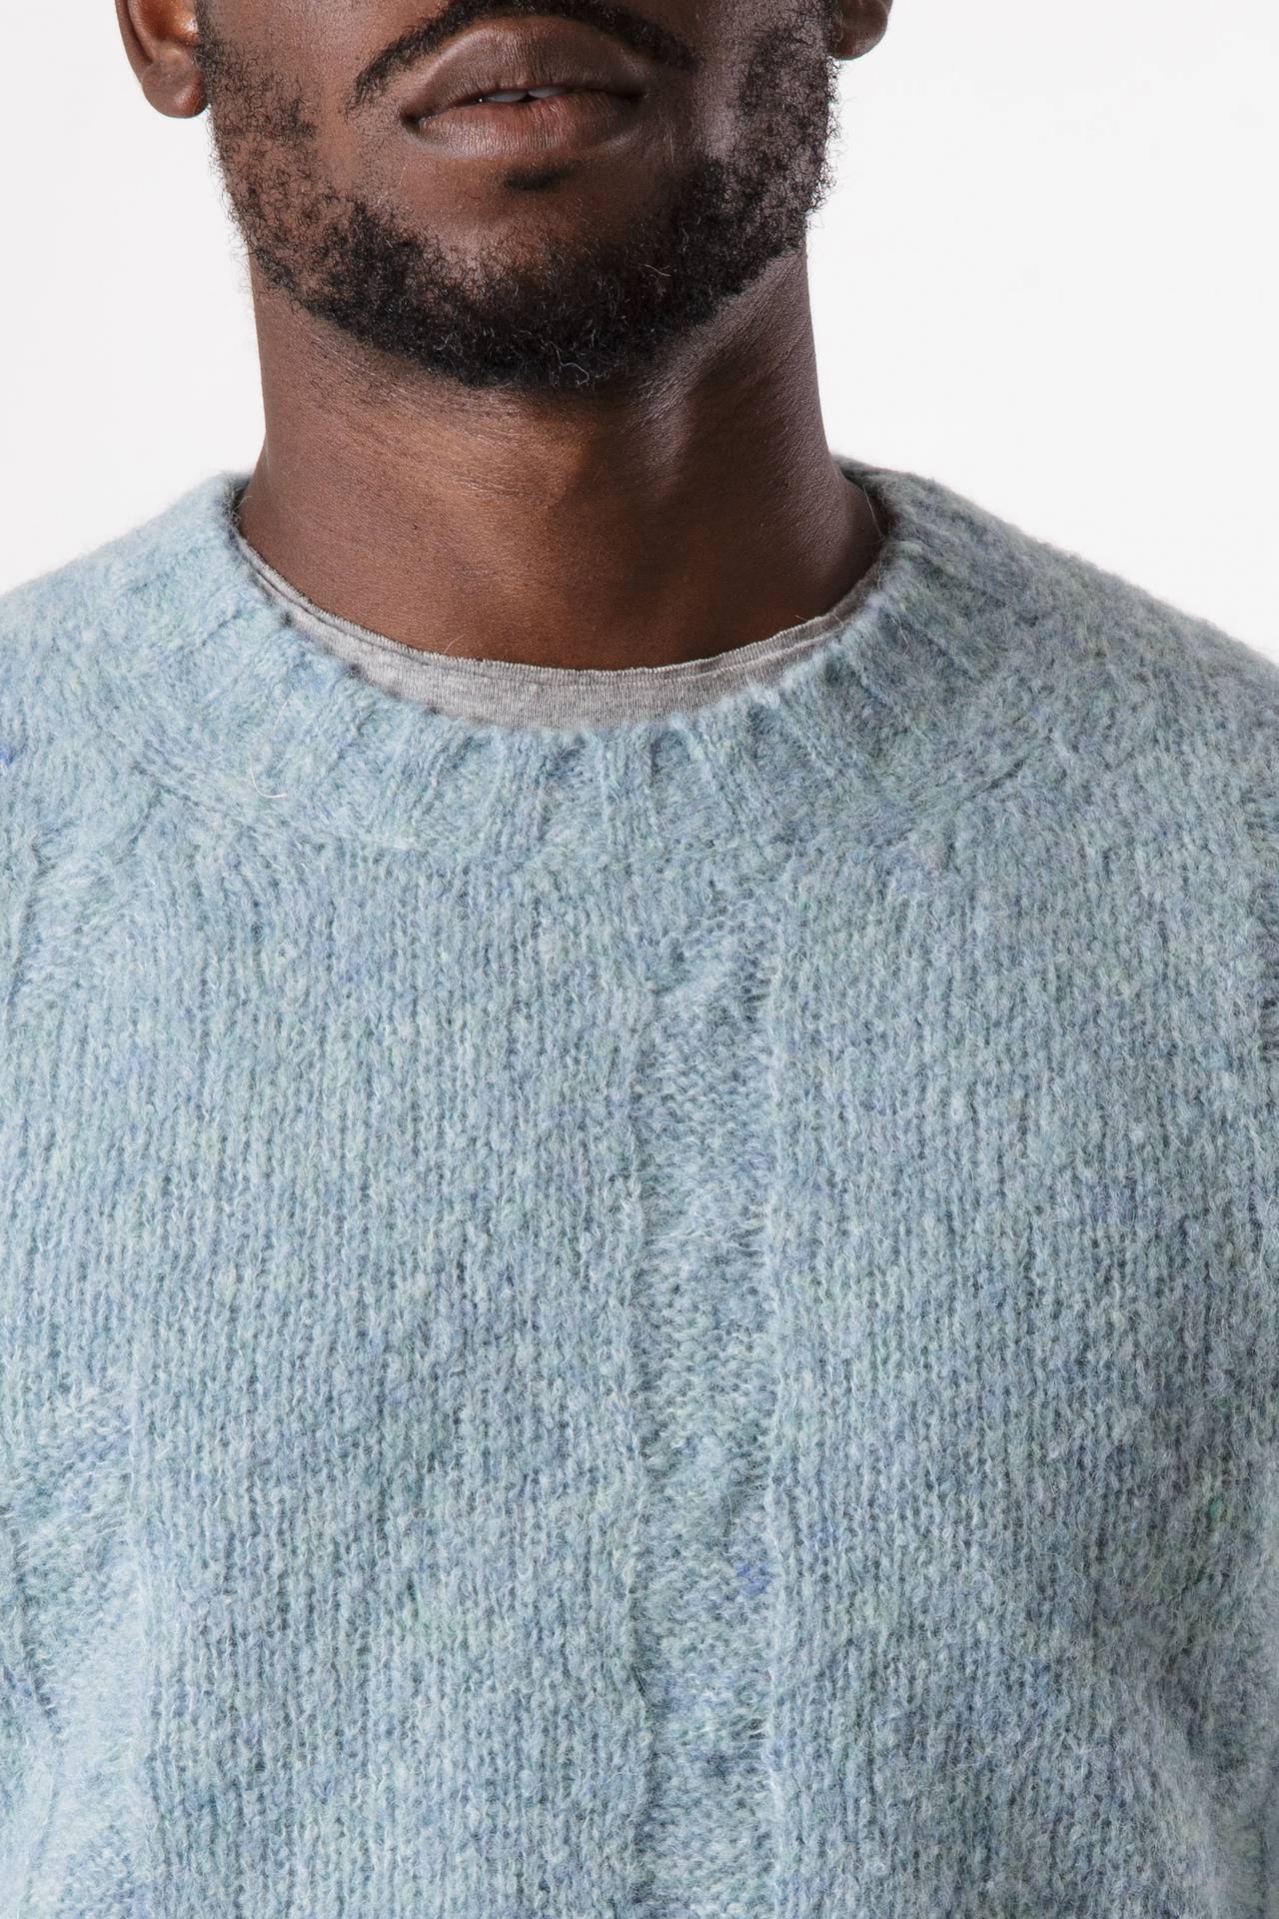 Smooth knit